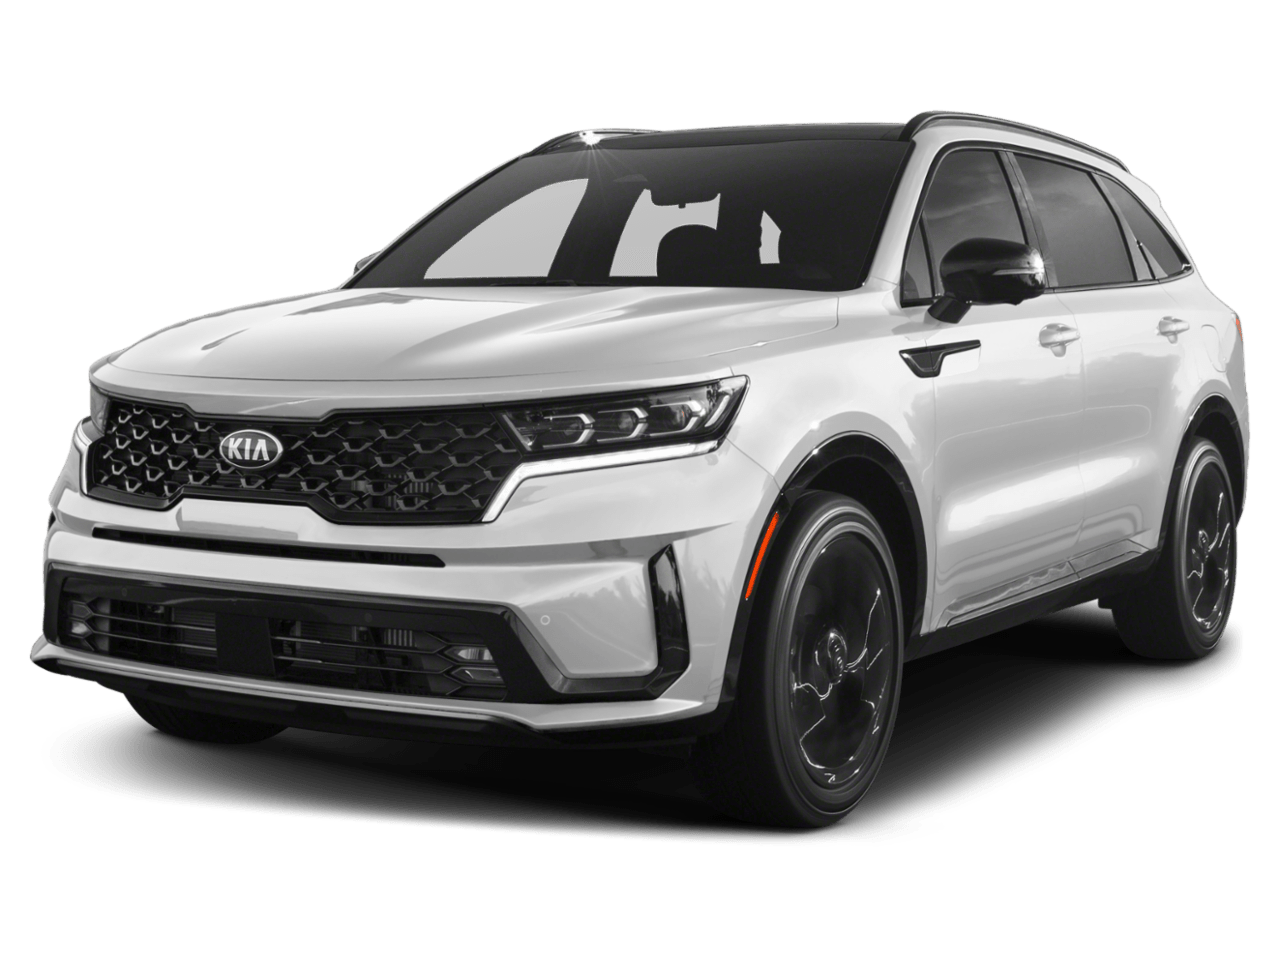 2021 kia models and prices